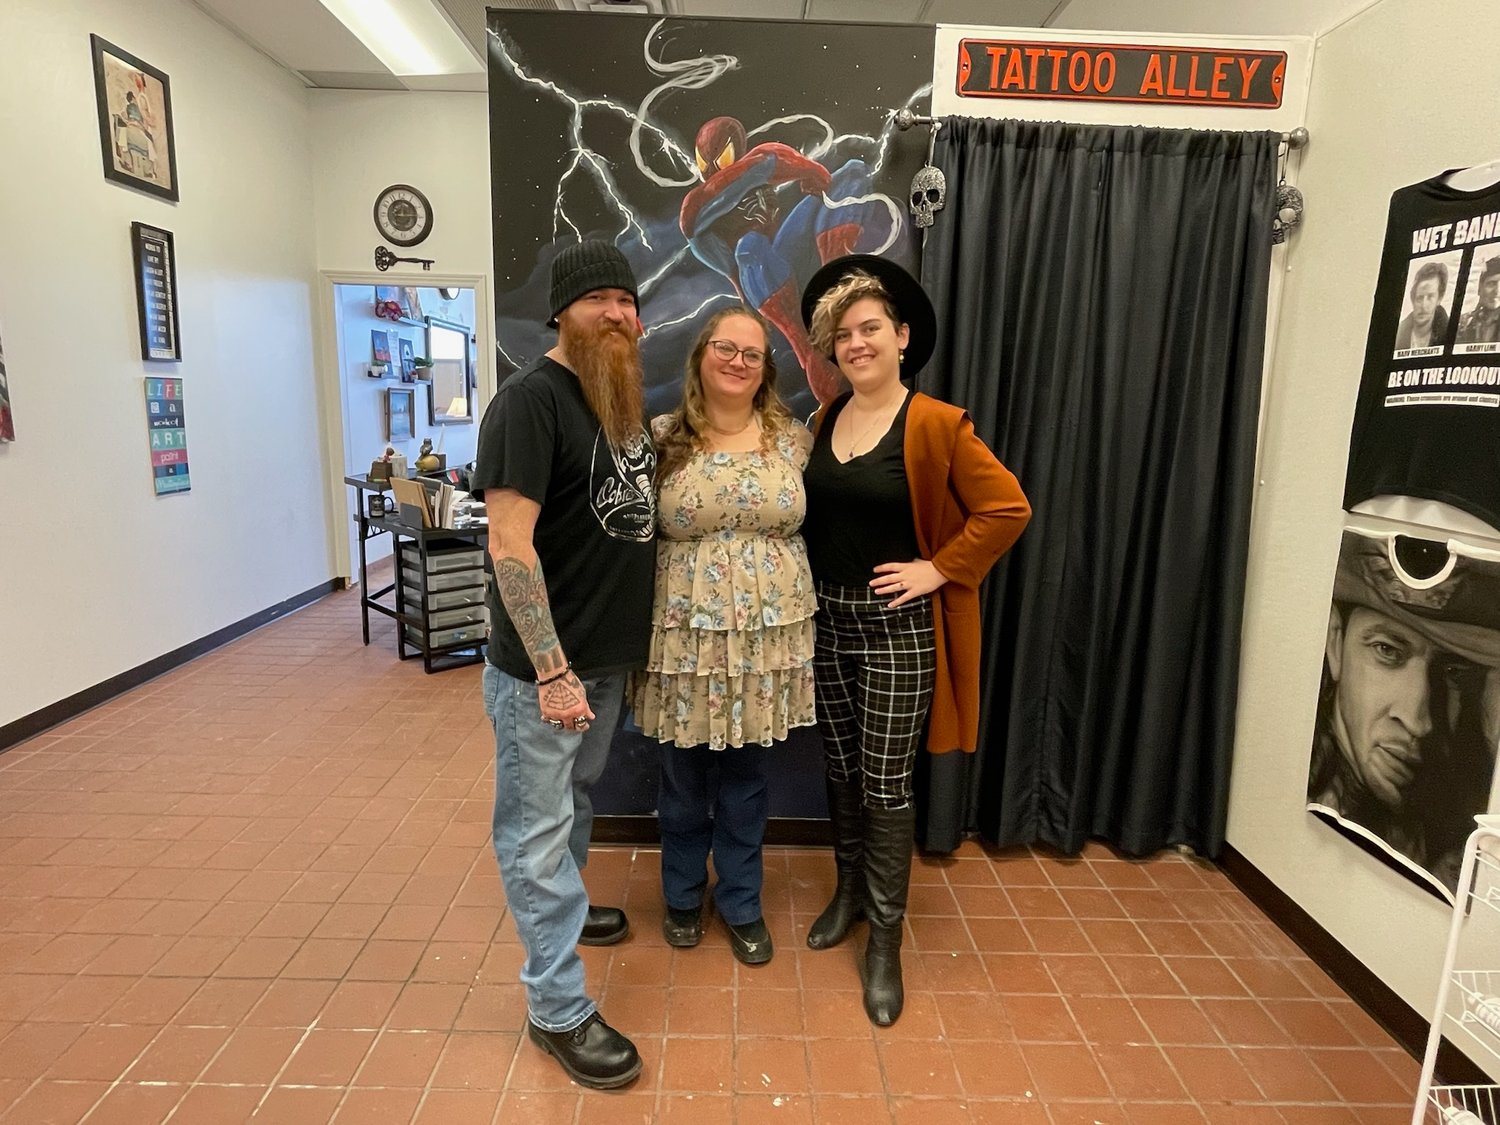 Art Instructor Steve Snegon, Administrative Director Moria Egan, and Assistant Instructor Caitlin Carlo, stand inside E-98 Art Studio & Gallery on Rome-Taberg Road, in front of a Spiderman mural painted by Steve.